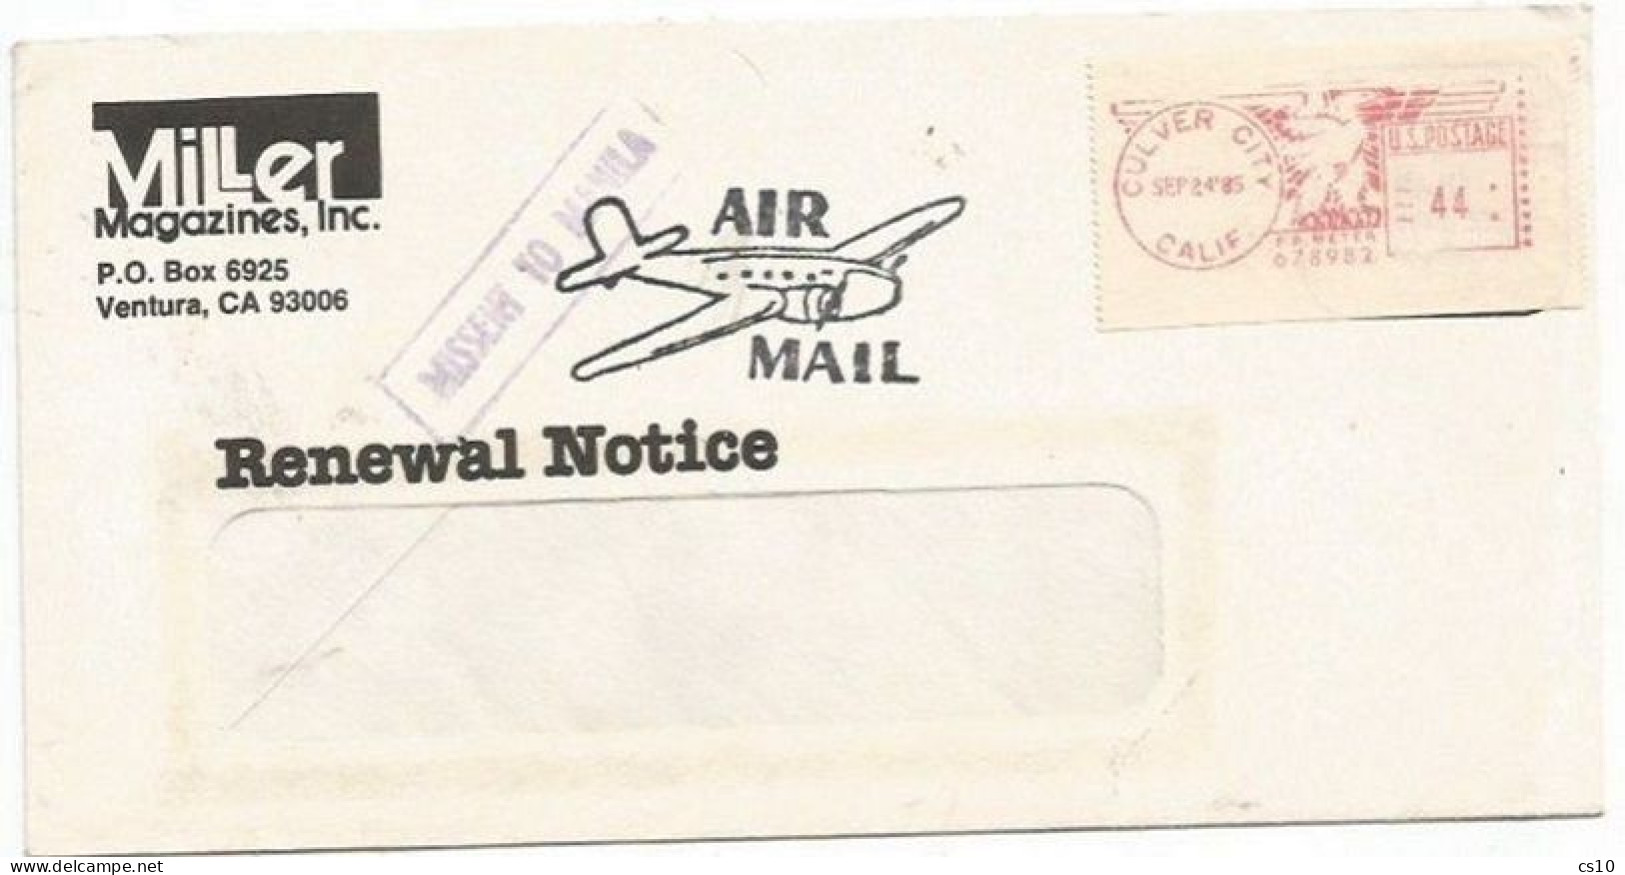 USA 1985 AirmailCV Culver City CA 24sep85 X Italy Milano "MISSENT TO MANILA" Postage Label C.44 - Marcophilie